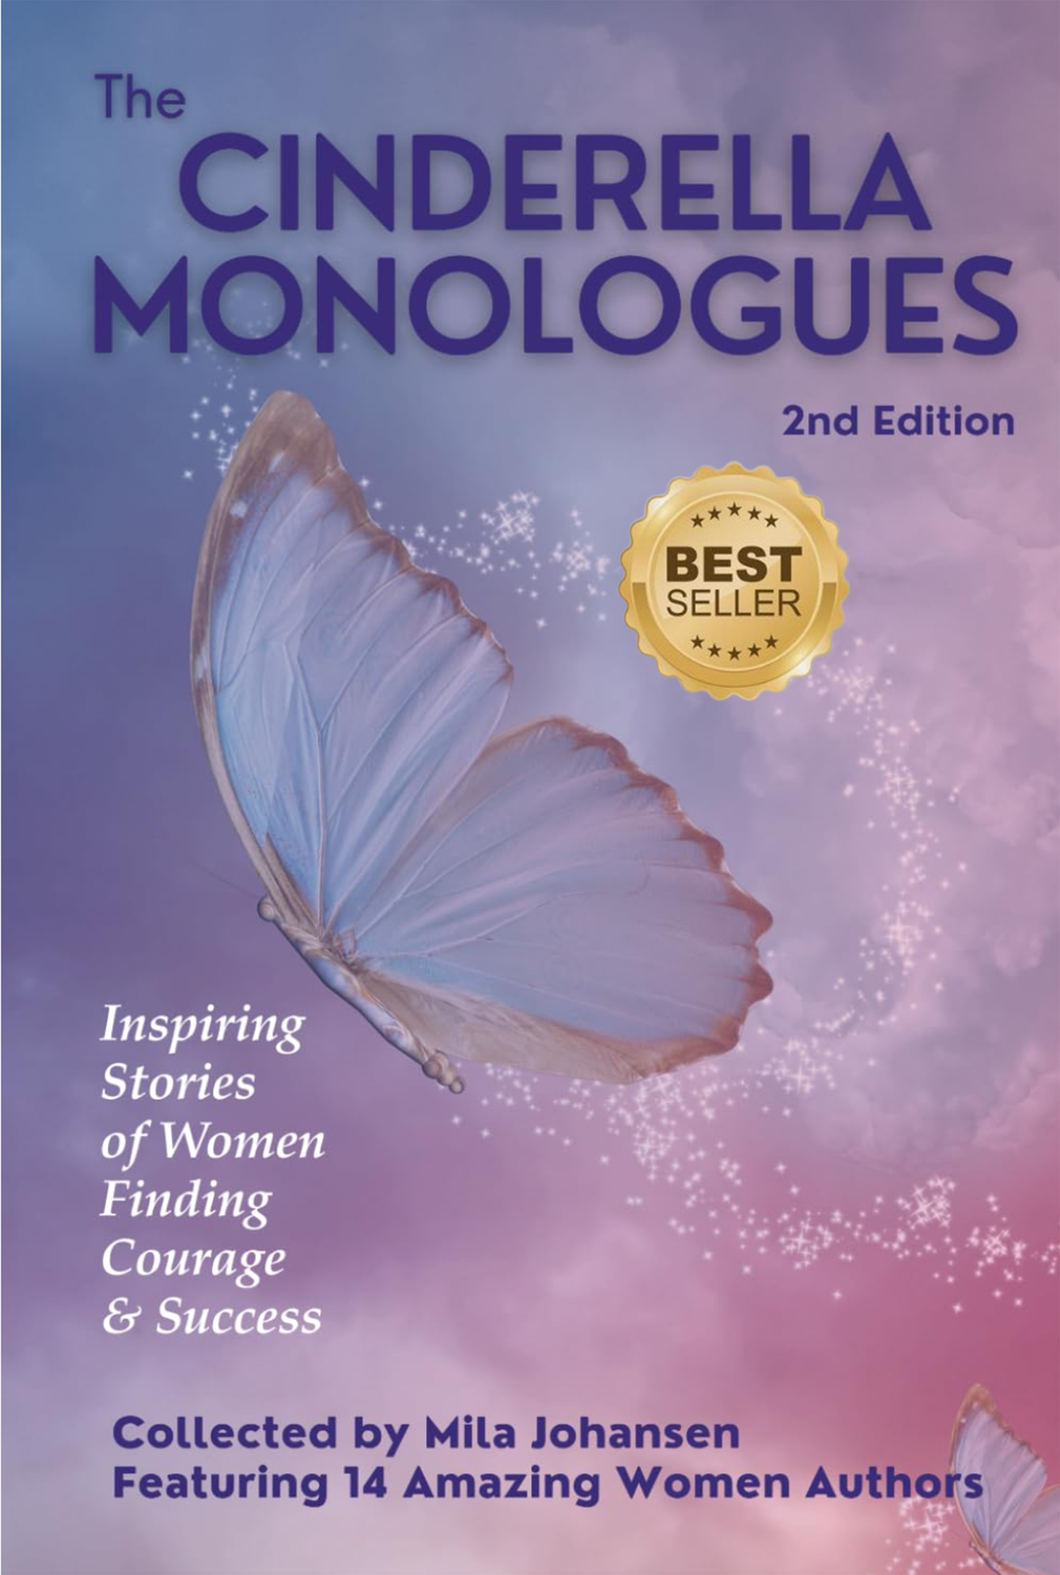 The Cinderella Monologues, 2nd Edition - An Amazon BESTSELLER!  A combined Anthology of 15 Women's Stories of Courage and Success